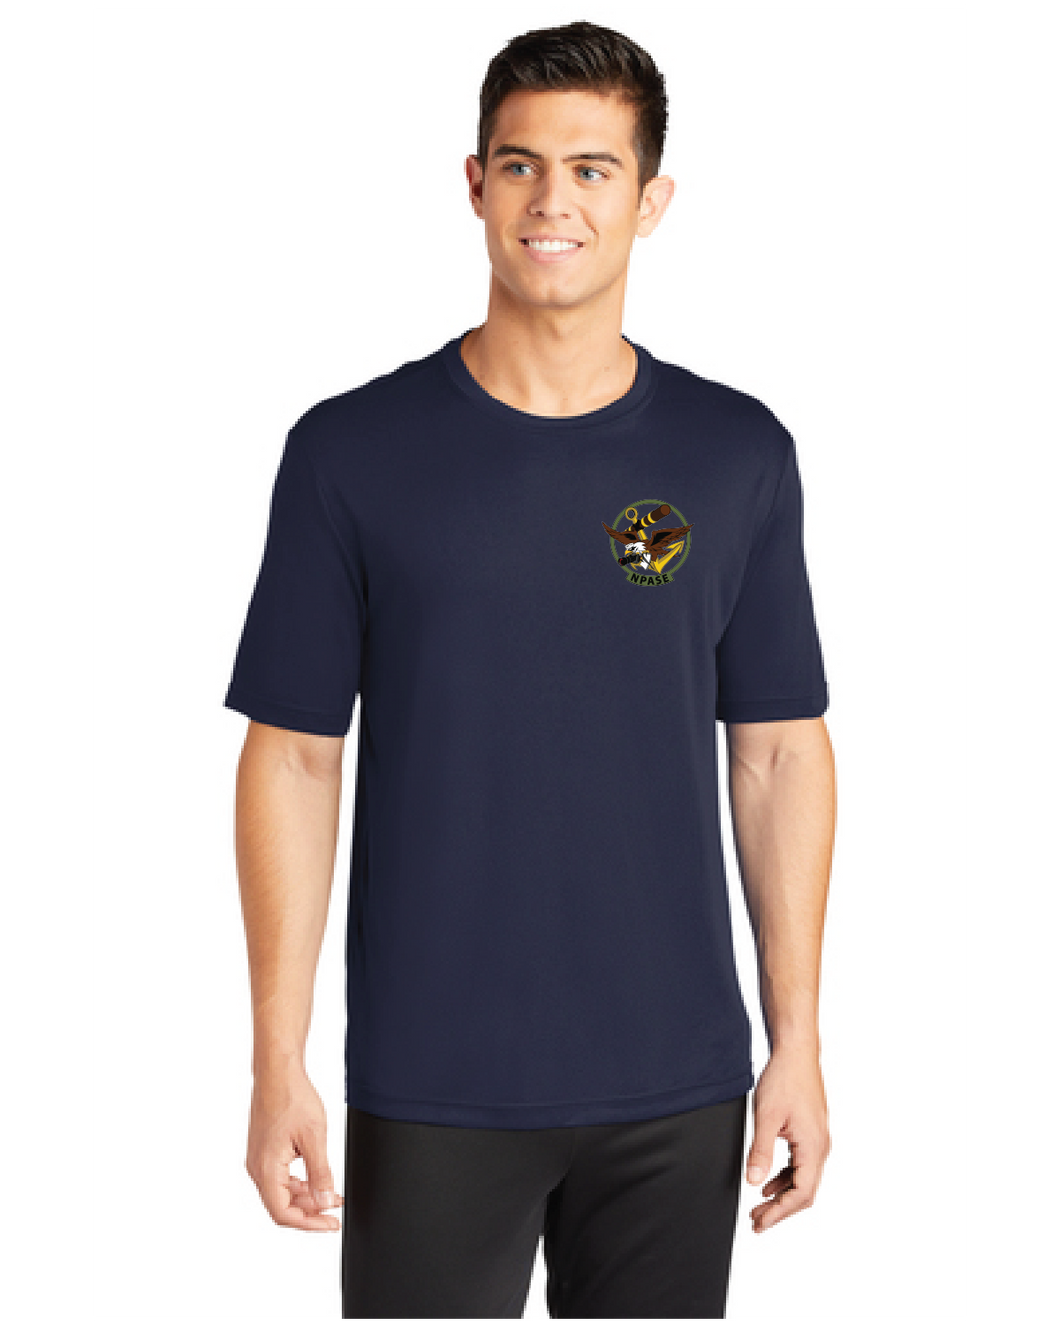 PosiCharge Competitor Tee / Navy / NPASE Ship Store